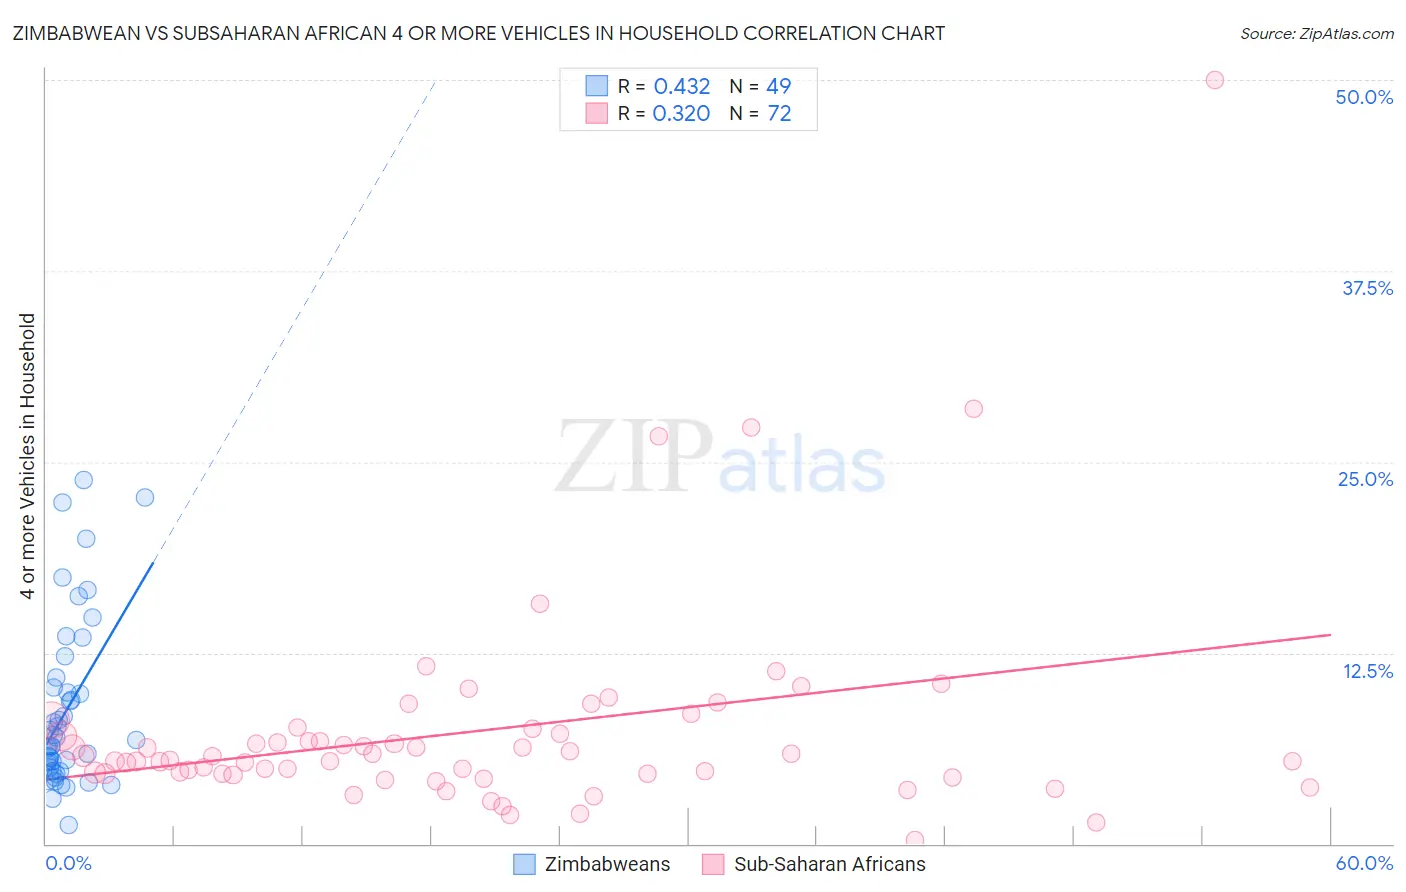 Zimbabwean vs Subsaharan African 4 or more Vehicles in Household